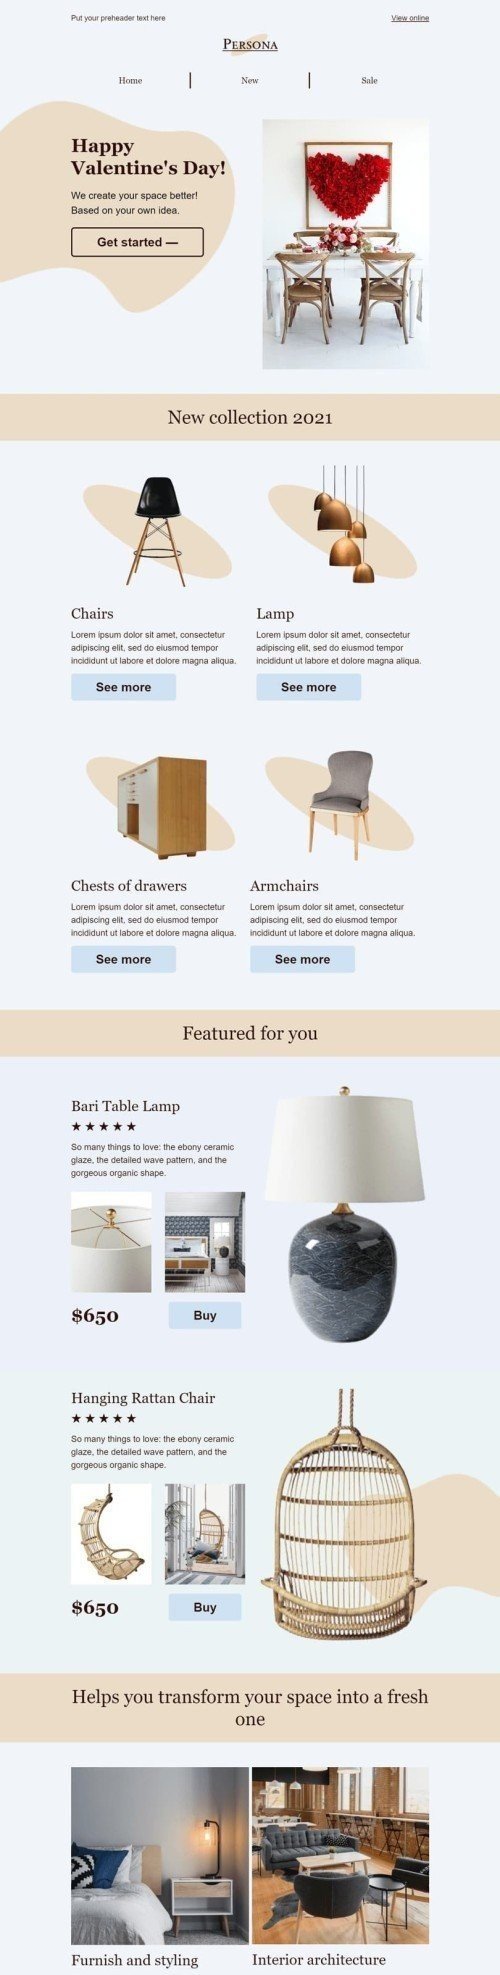 Valentine’s Day Email Template «Romantic design» for Furniture, Interior & DIY industry desktop view